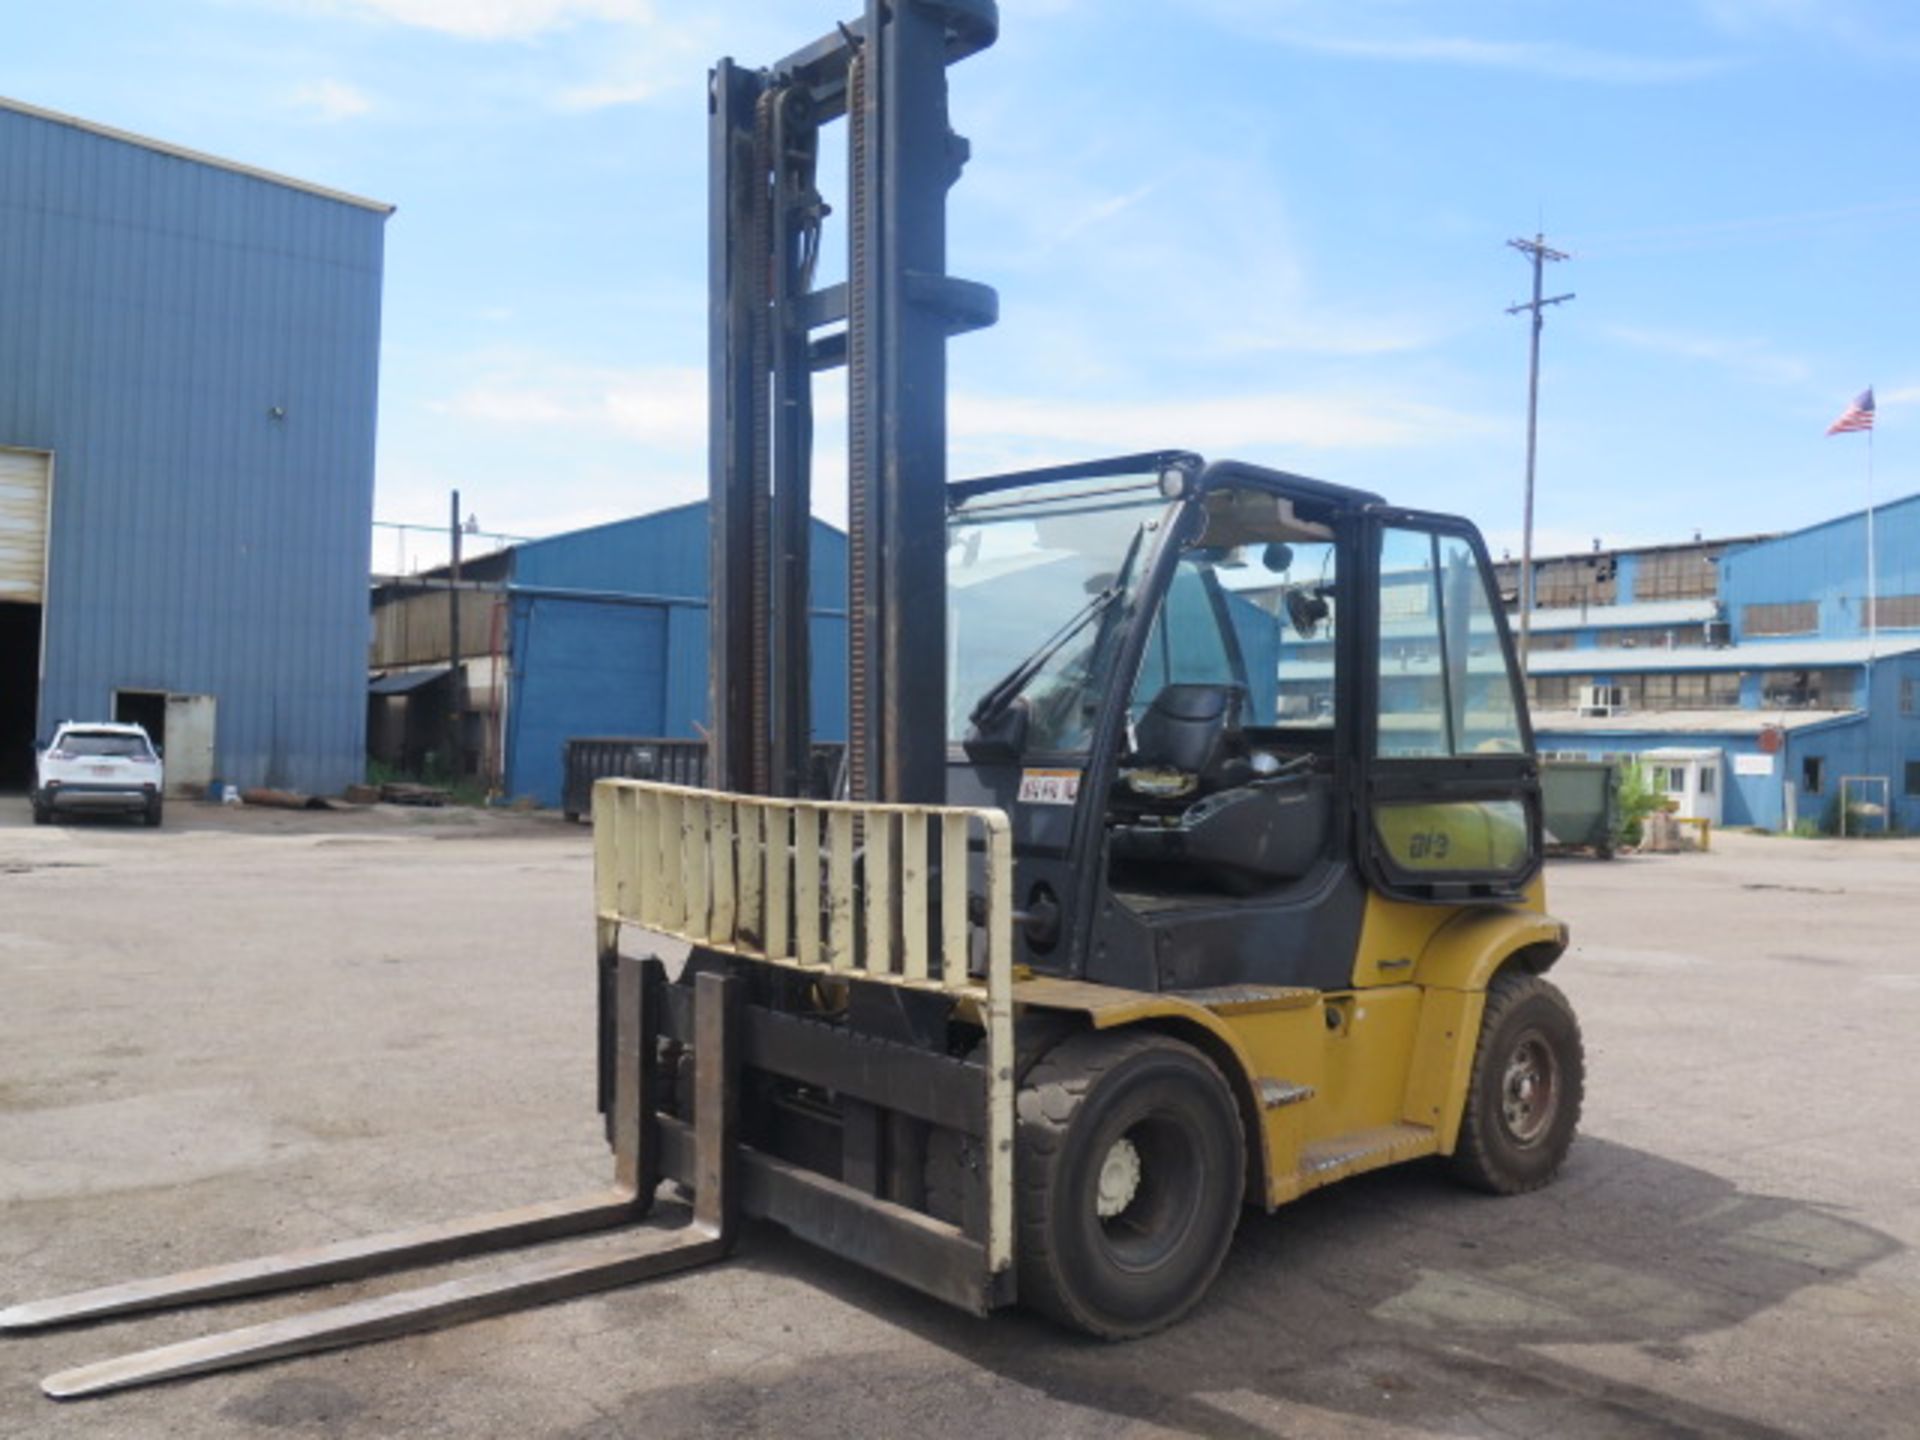 Yale GDP155VXNCHV148 15,400 Lb Cap Diesel Forklift s/n C878V01753F w/ 2-Stage Tall Mast, 212” Lift - Image 2 of 7